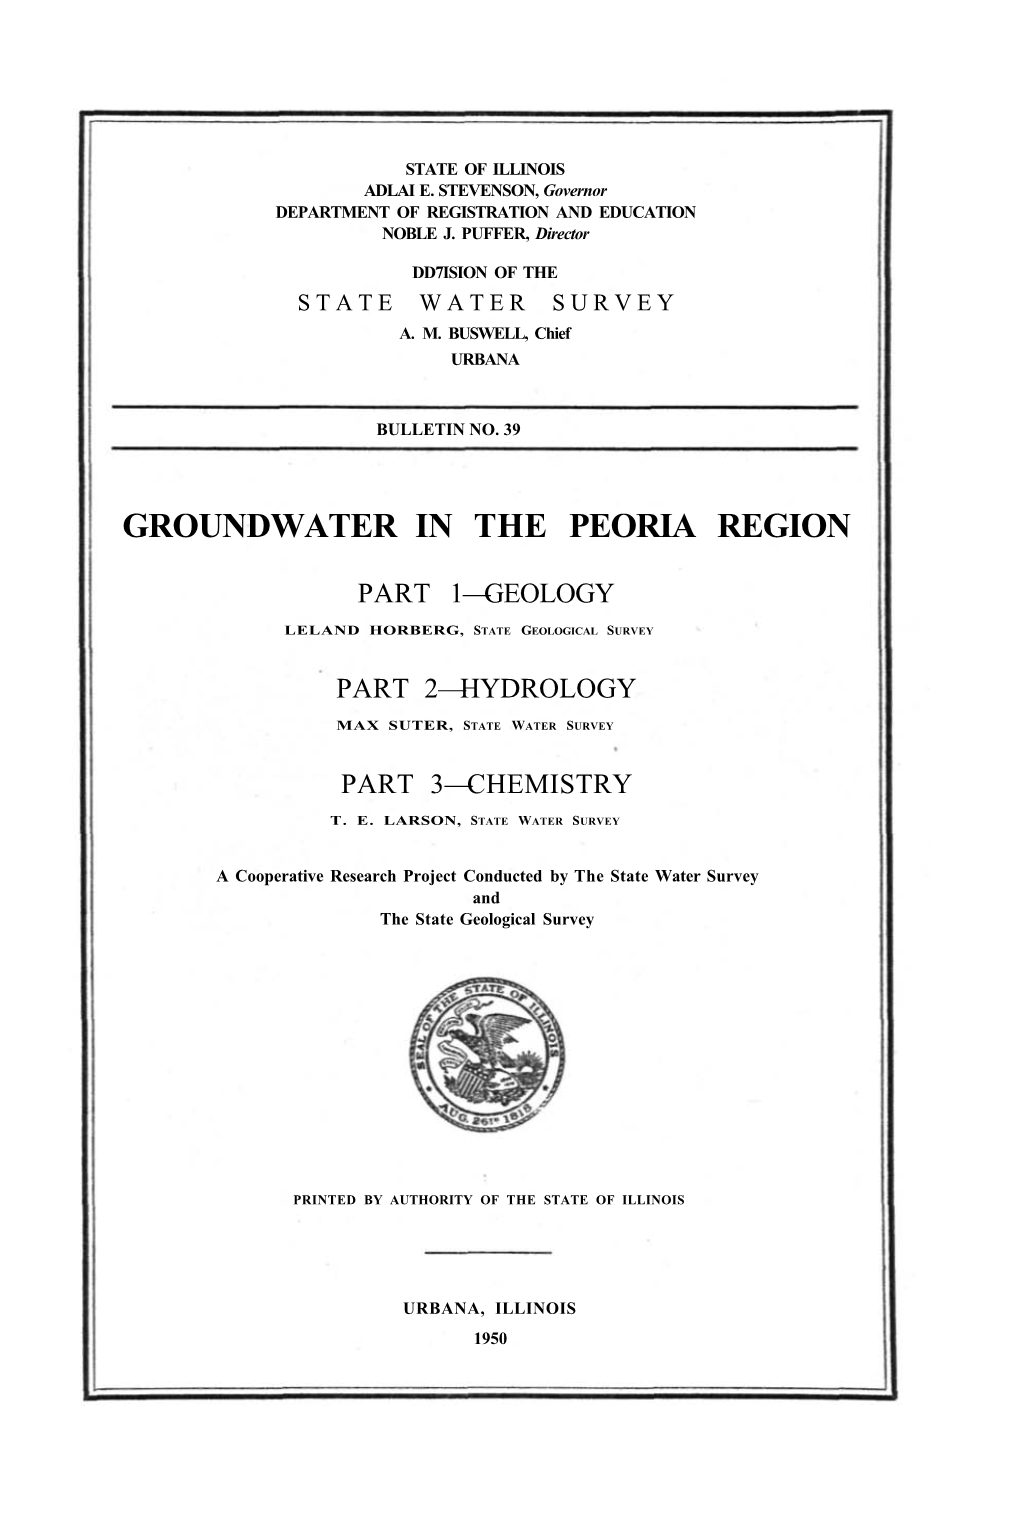 Groundwater in the Peoria Region